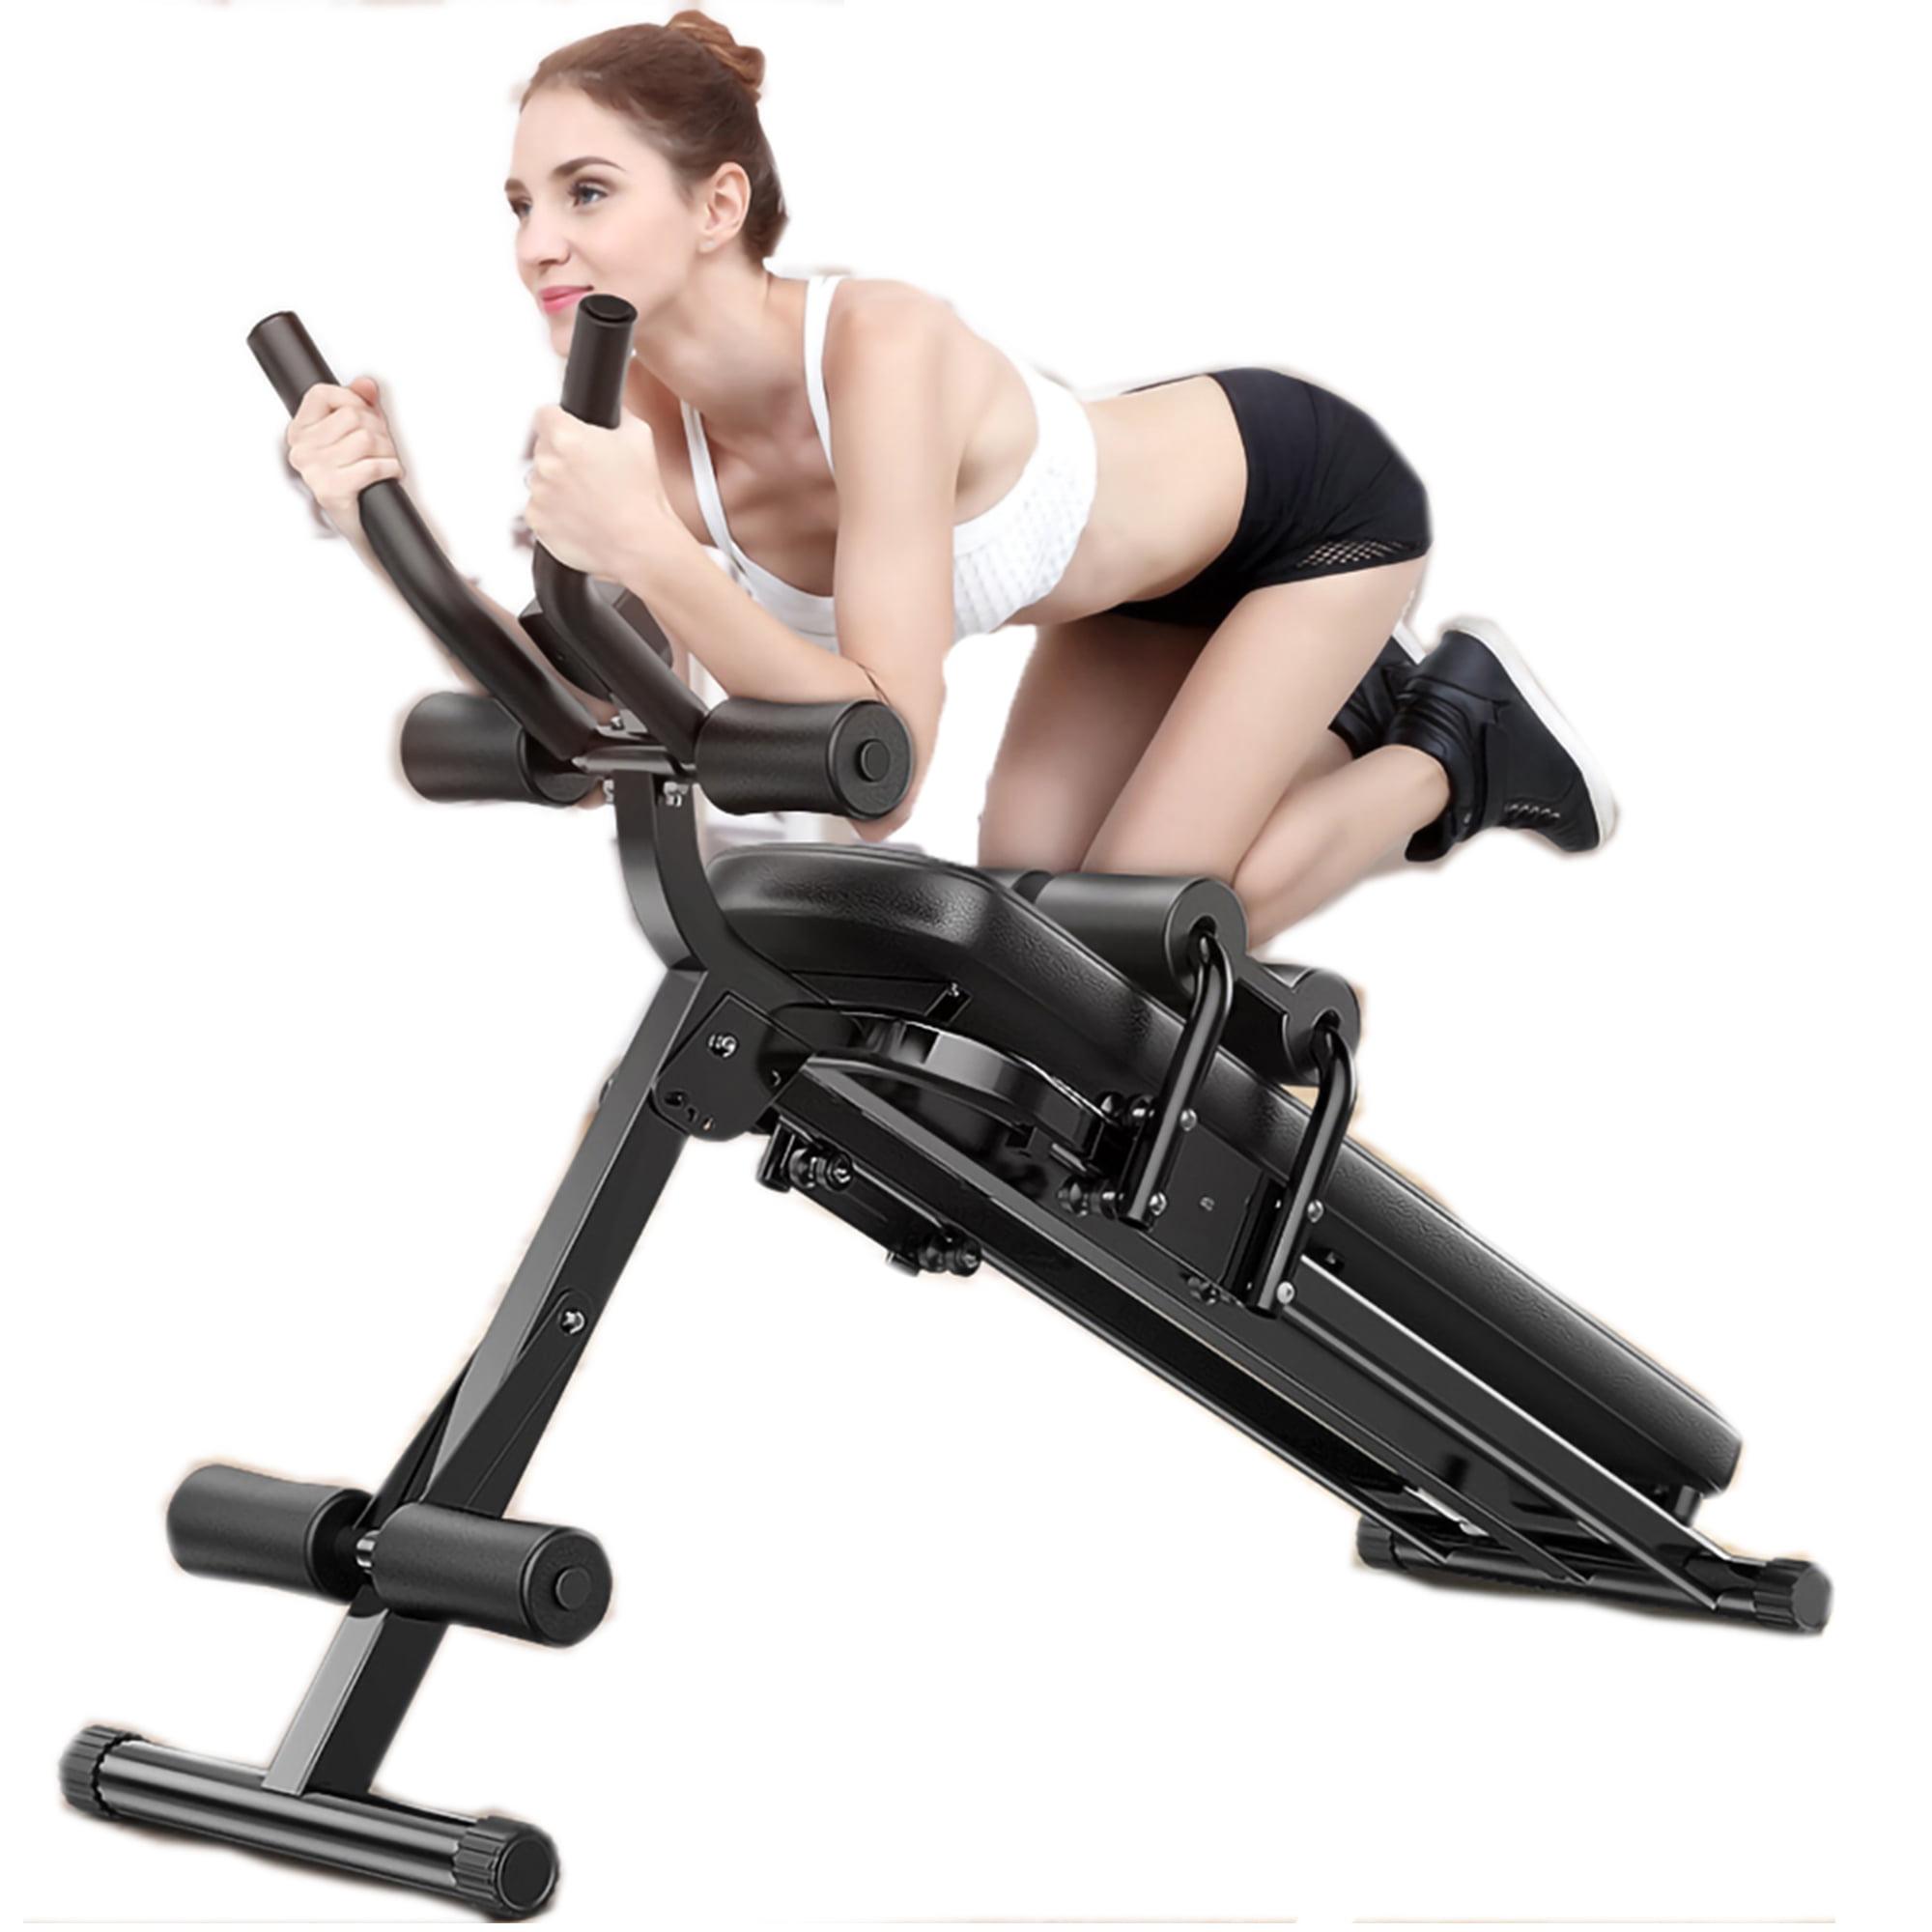 Abdominal Ab Workout Machine Crunch Exercise Equipment Fitness Training Muscle 